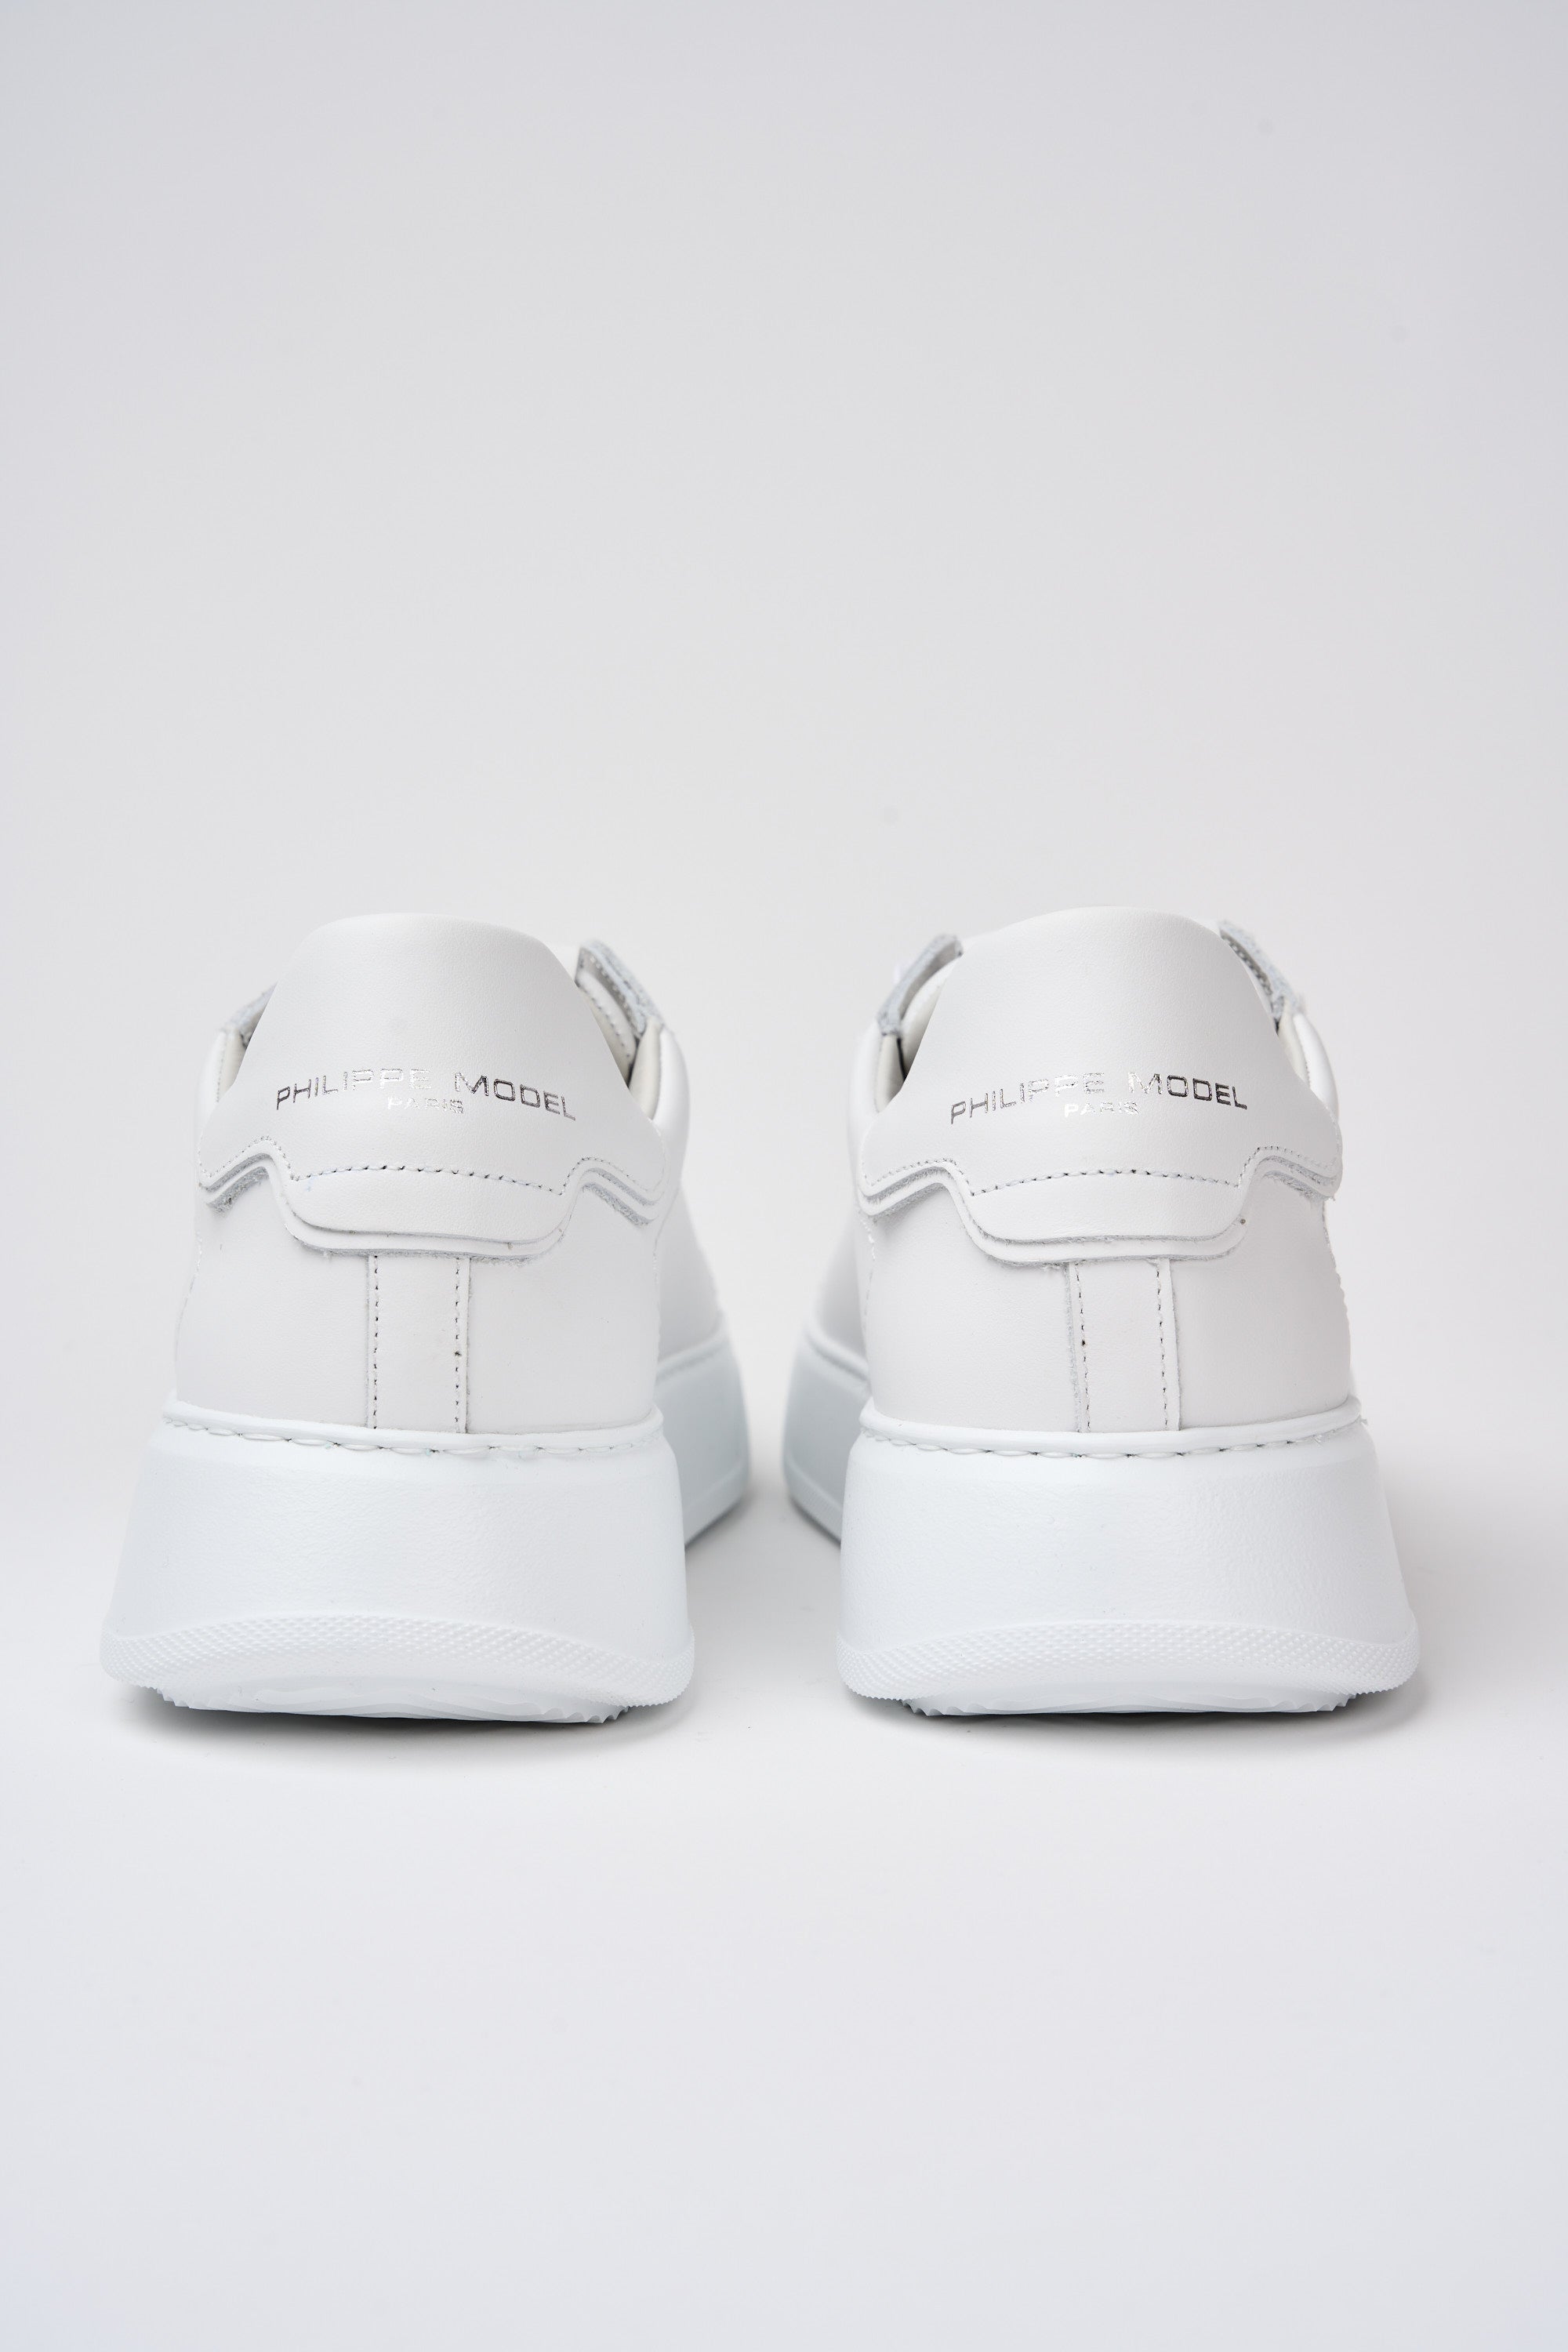 Philippe Model Sneakers Temple Leather White-5